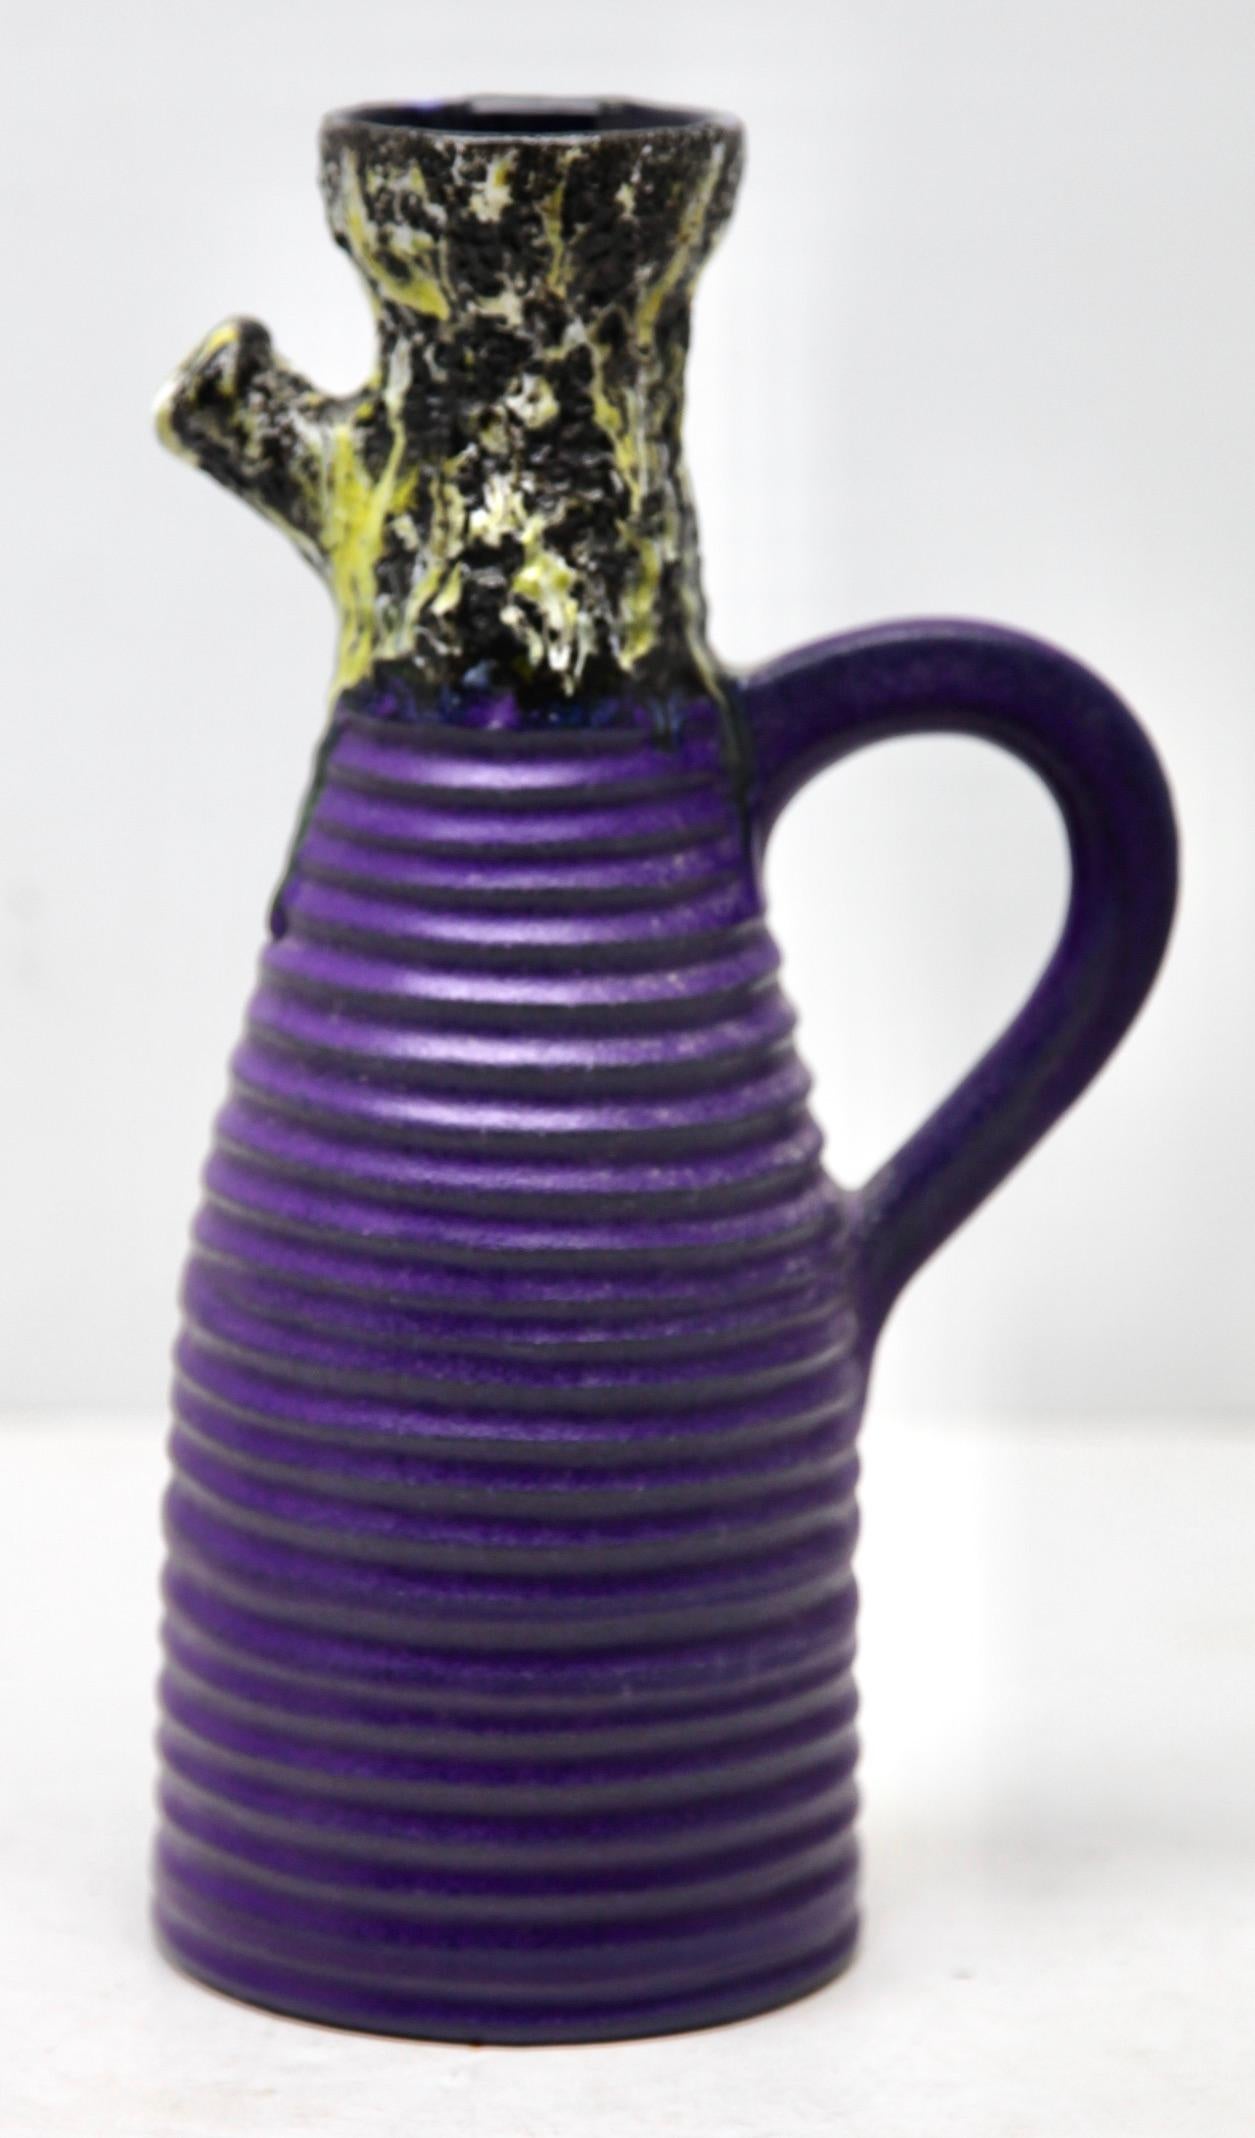 A classic 60s design. Of fat lava handled vase, pitcher in the classic sixties decor; with a rough glaze of dark earth-colour over the yellow and black. 
W-Germany. 
Hand decorated glaze.
Stunning color.

